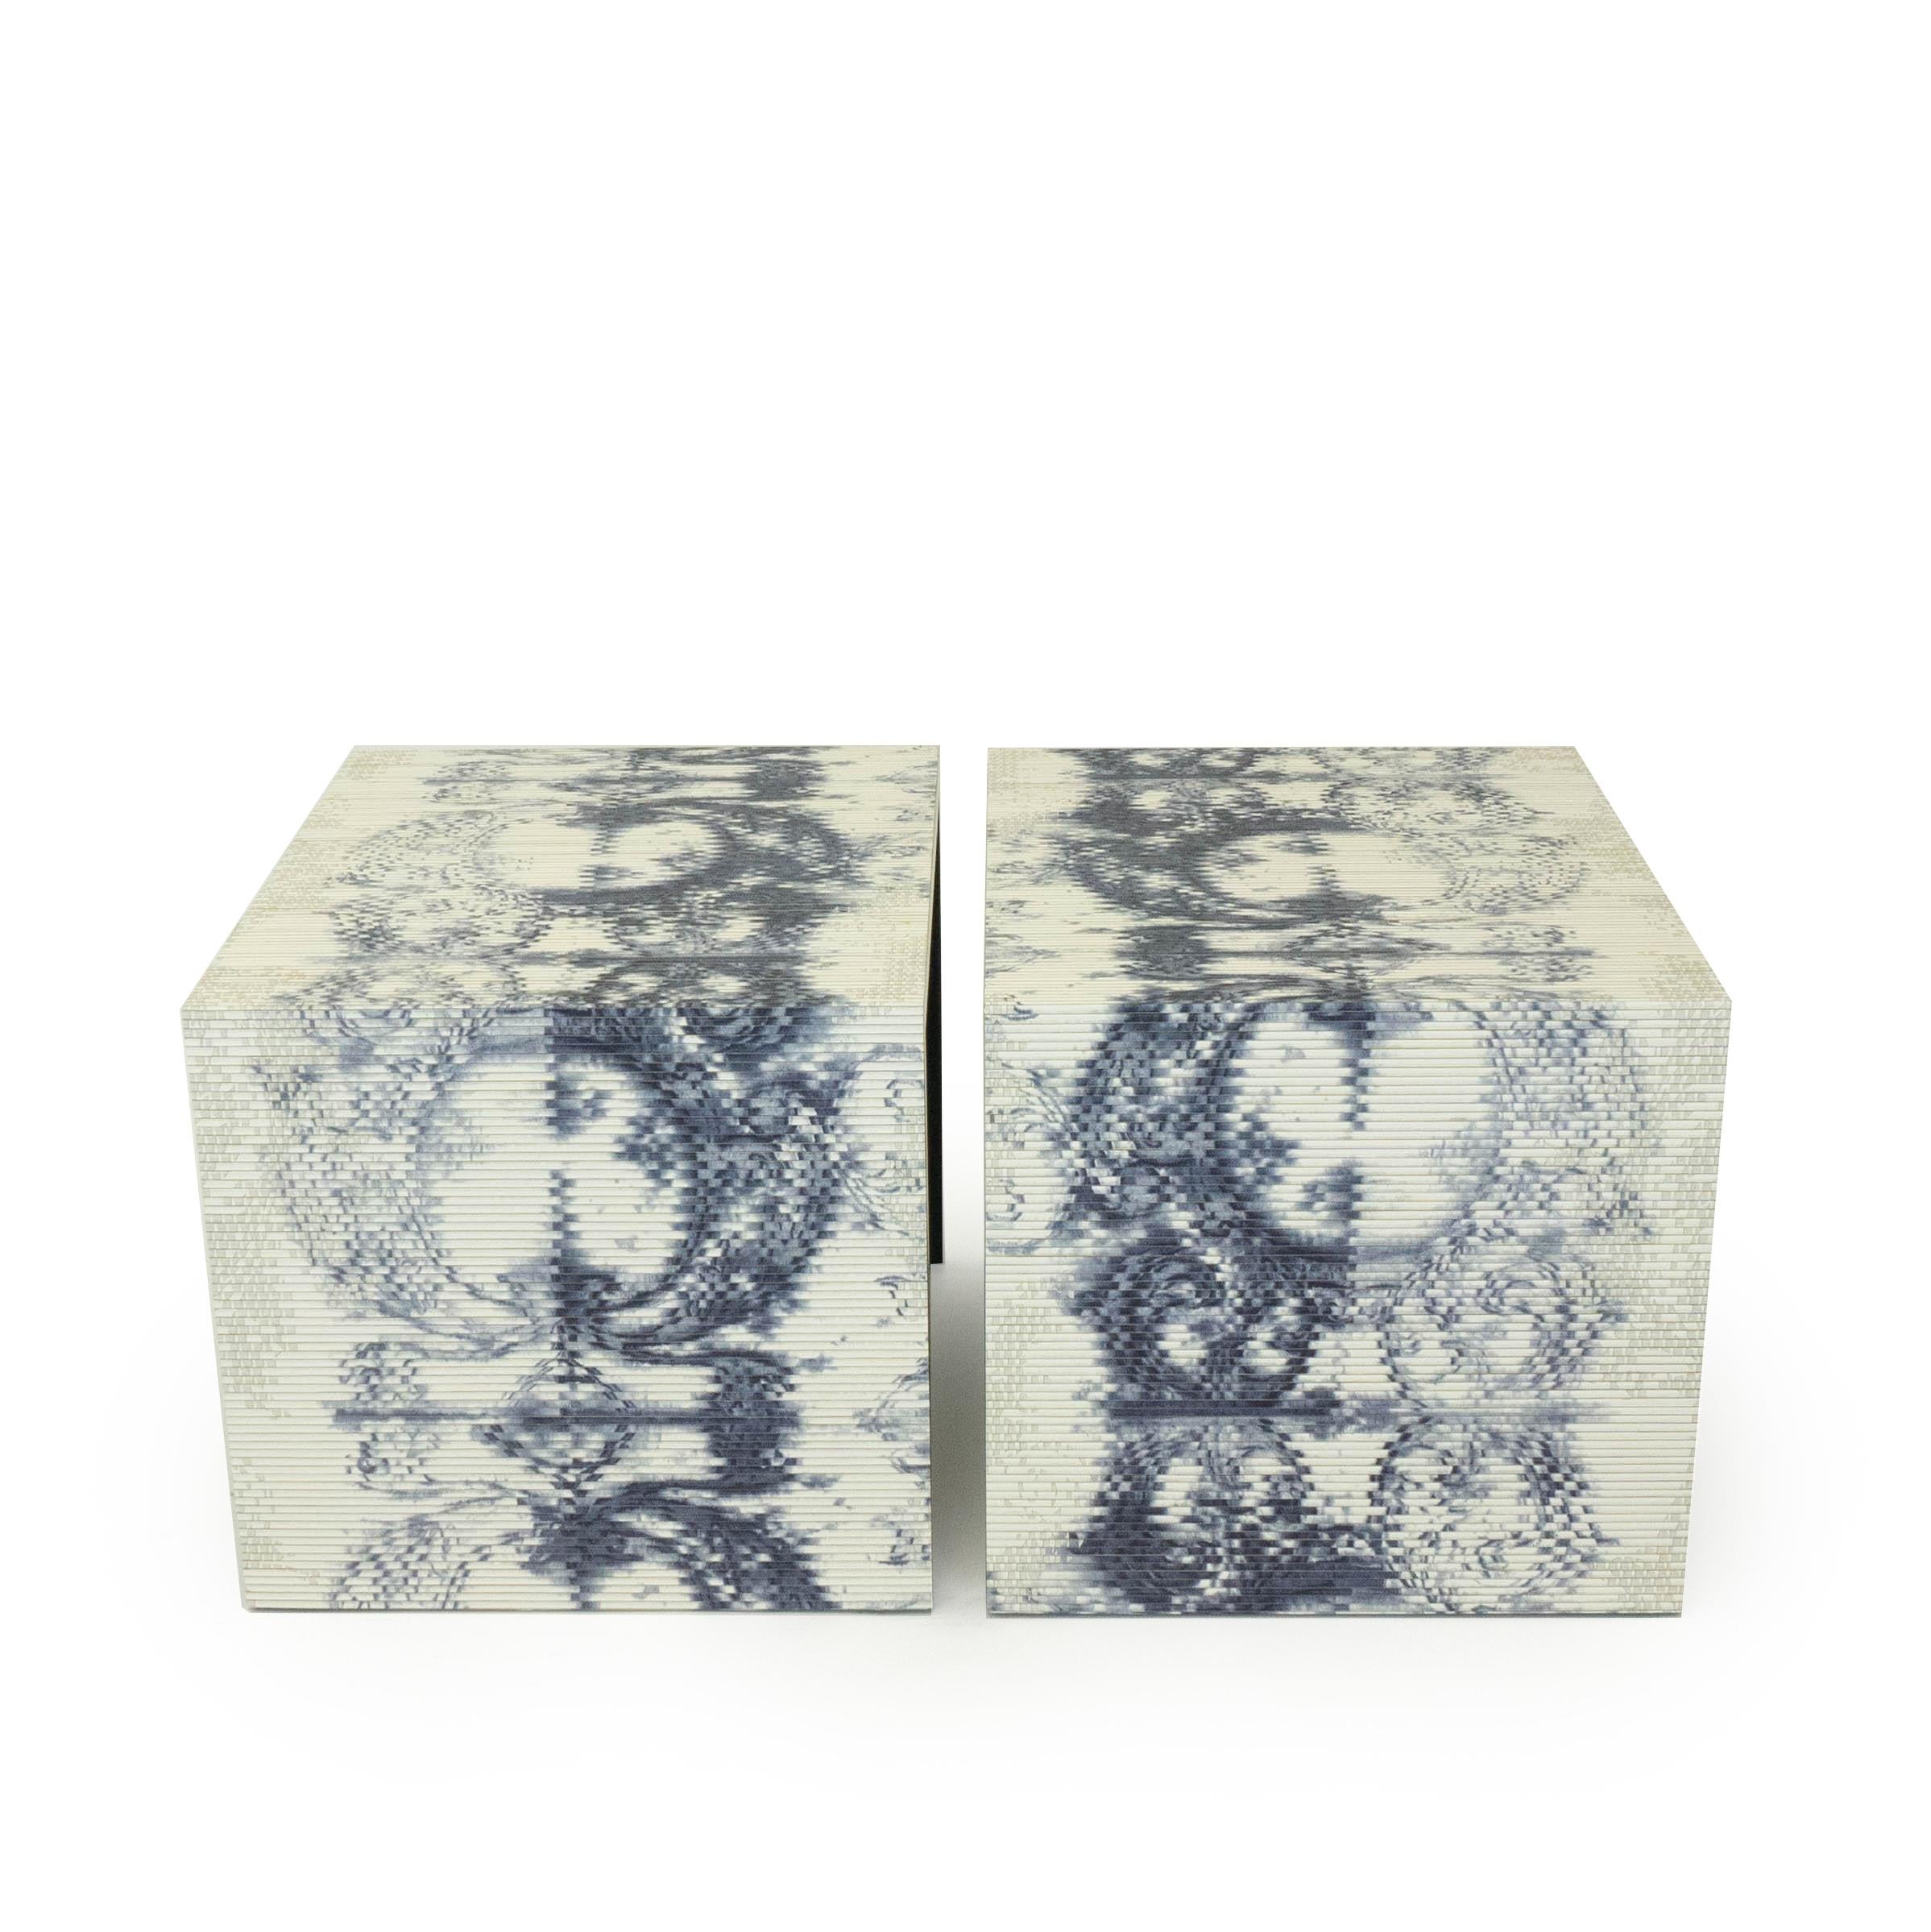 Contemporary Modern Square Side Tables with Textured Print Finish For Sale